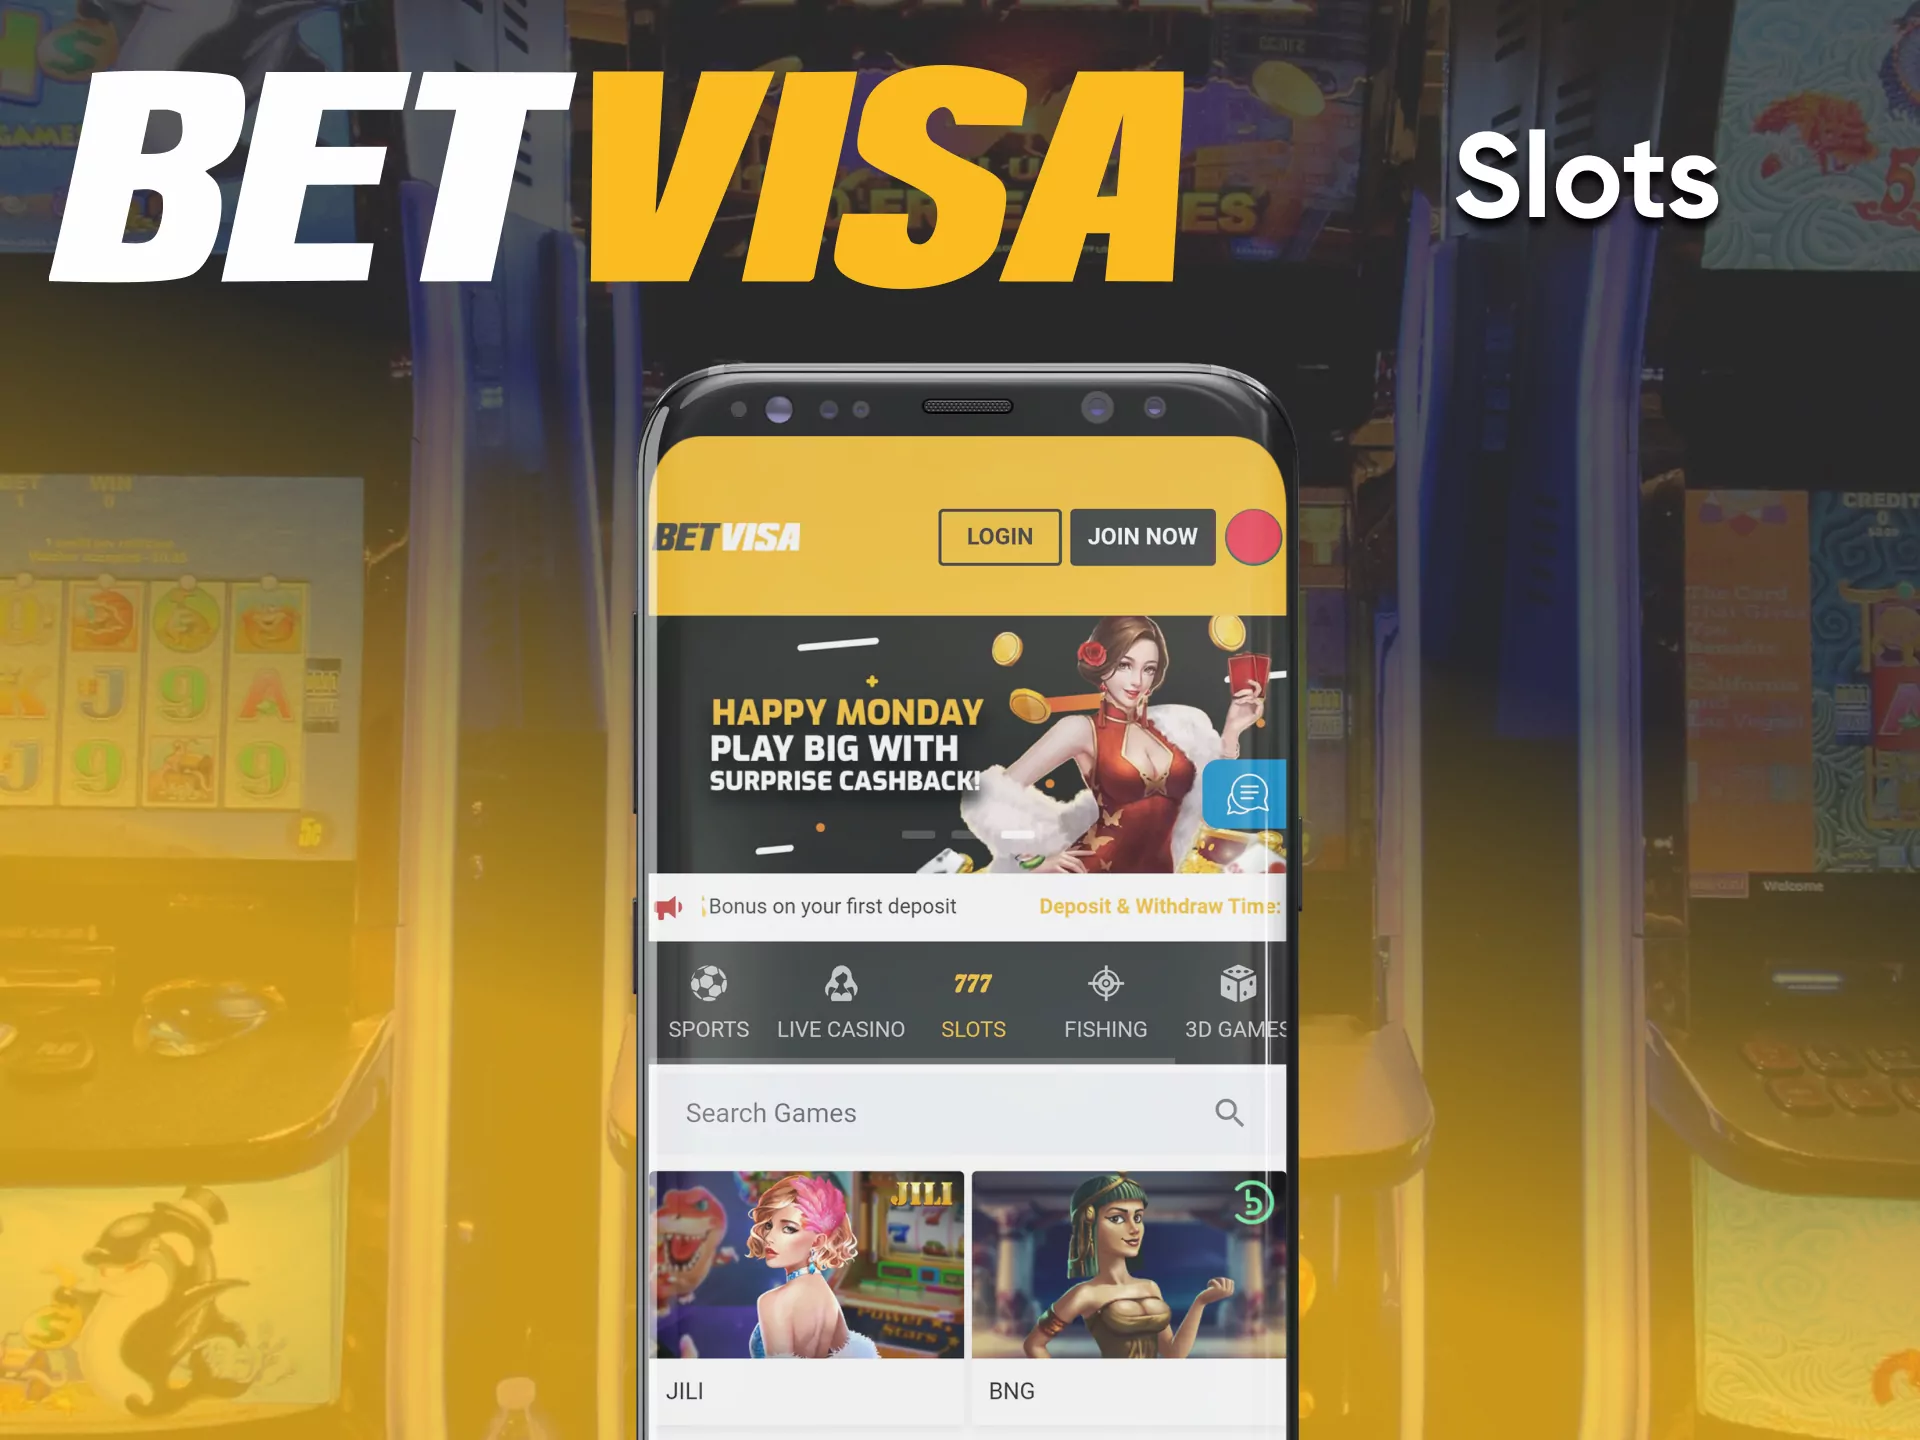 You can play slots games on BetVisa anytime.